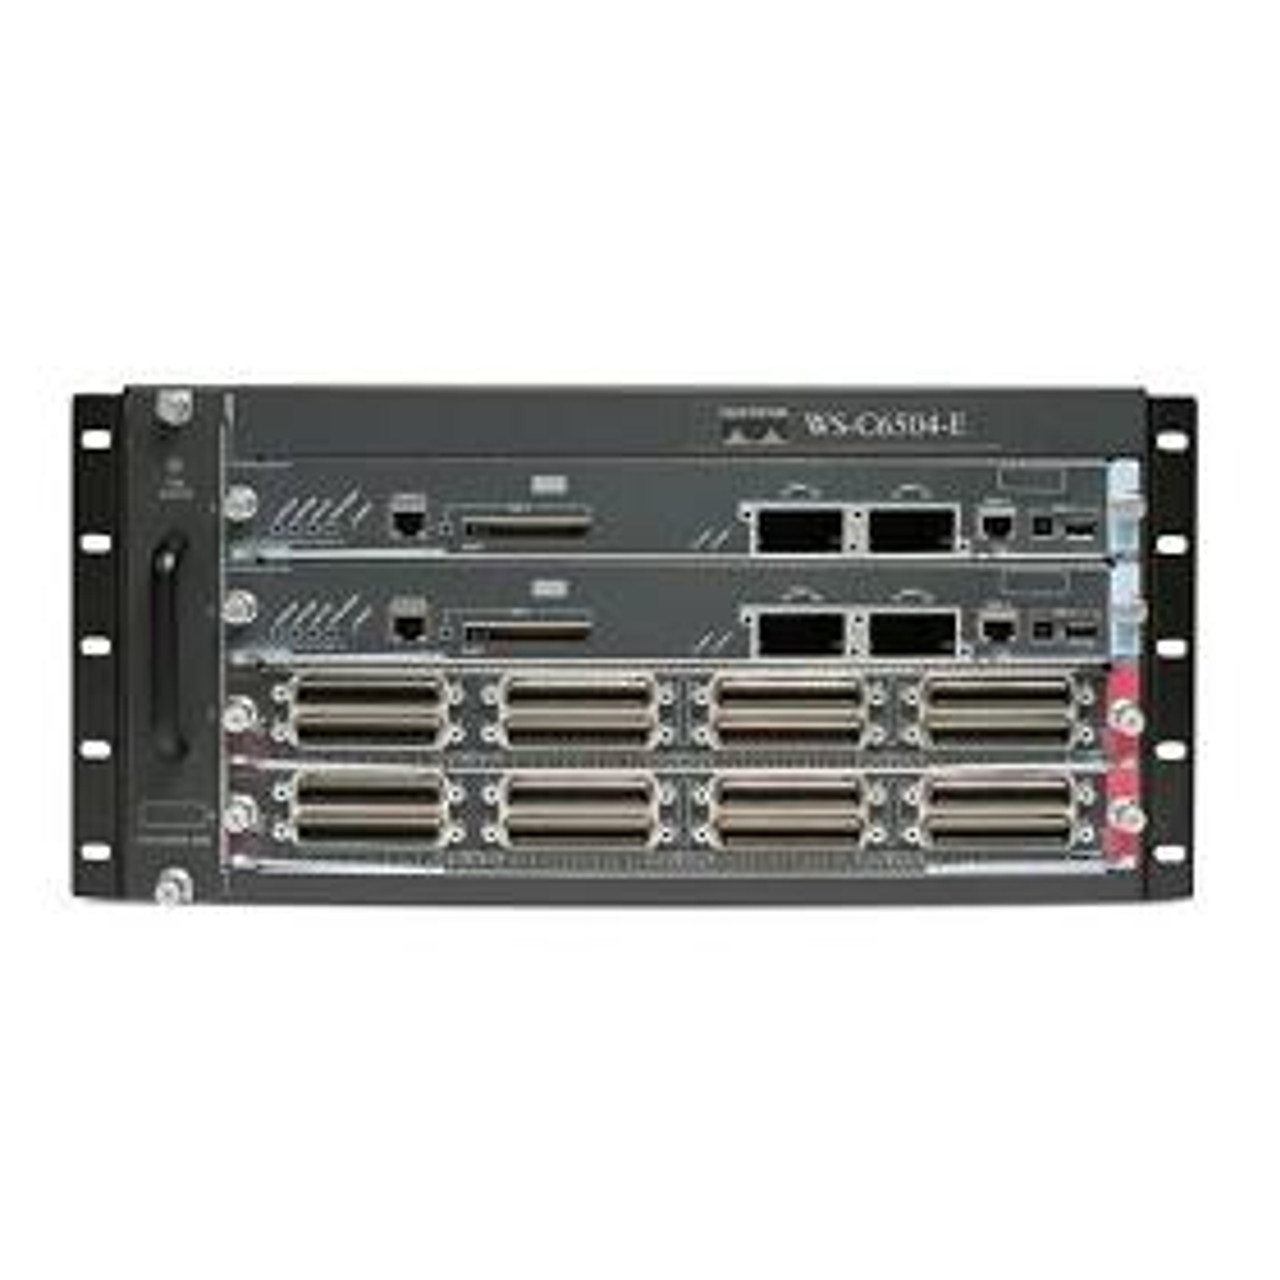 Cisco Catalyst 6504-E chassis with Supervisor Engine 32 Switch